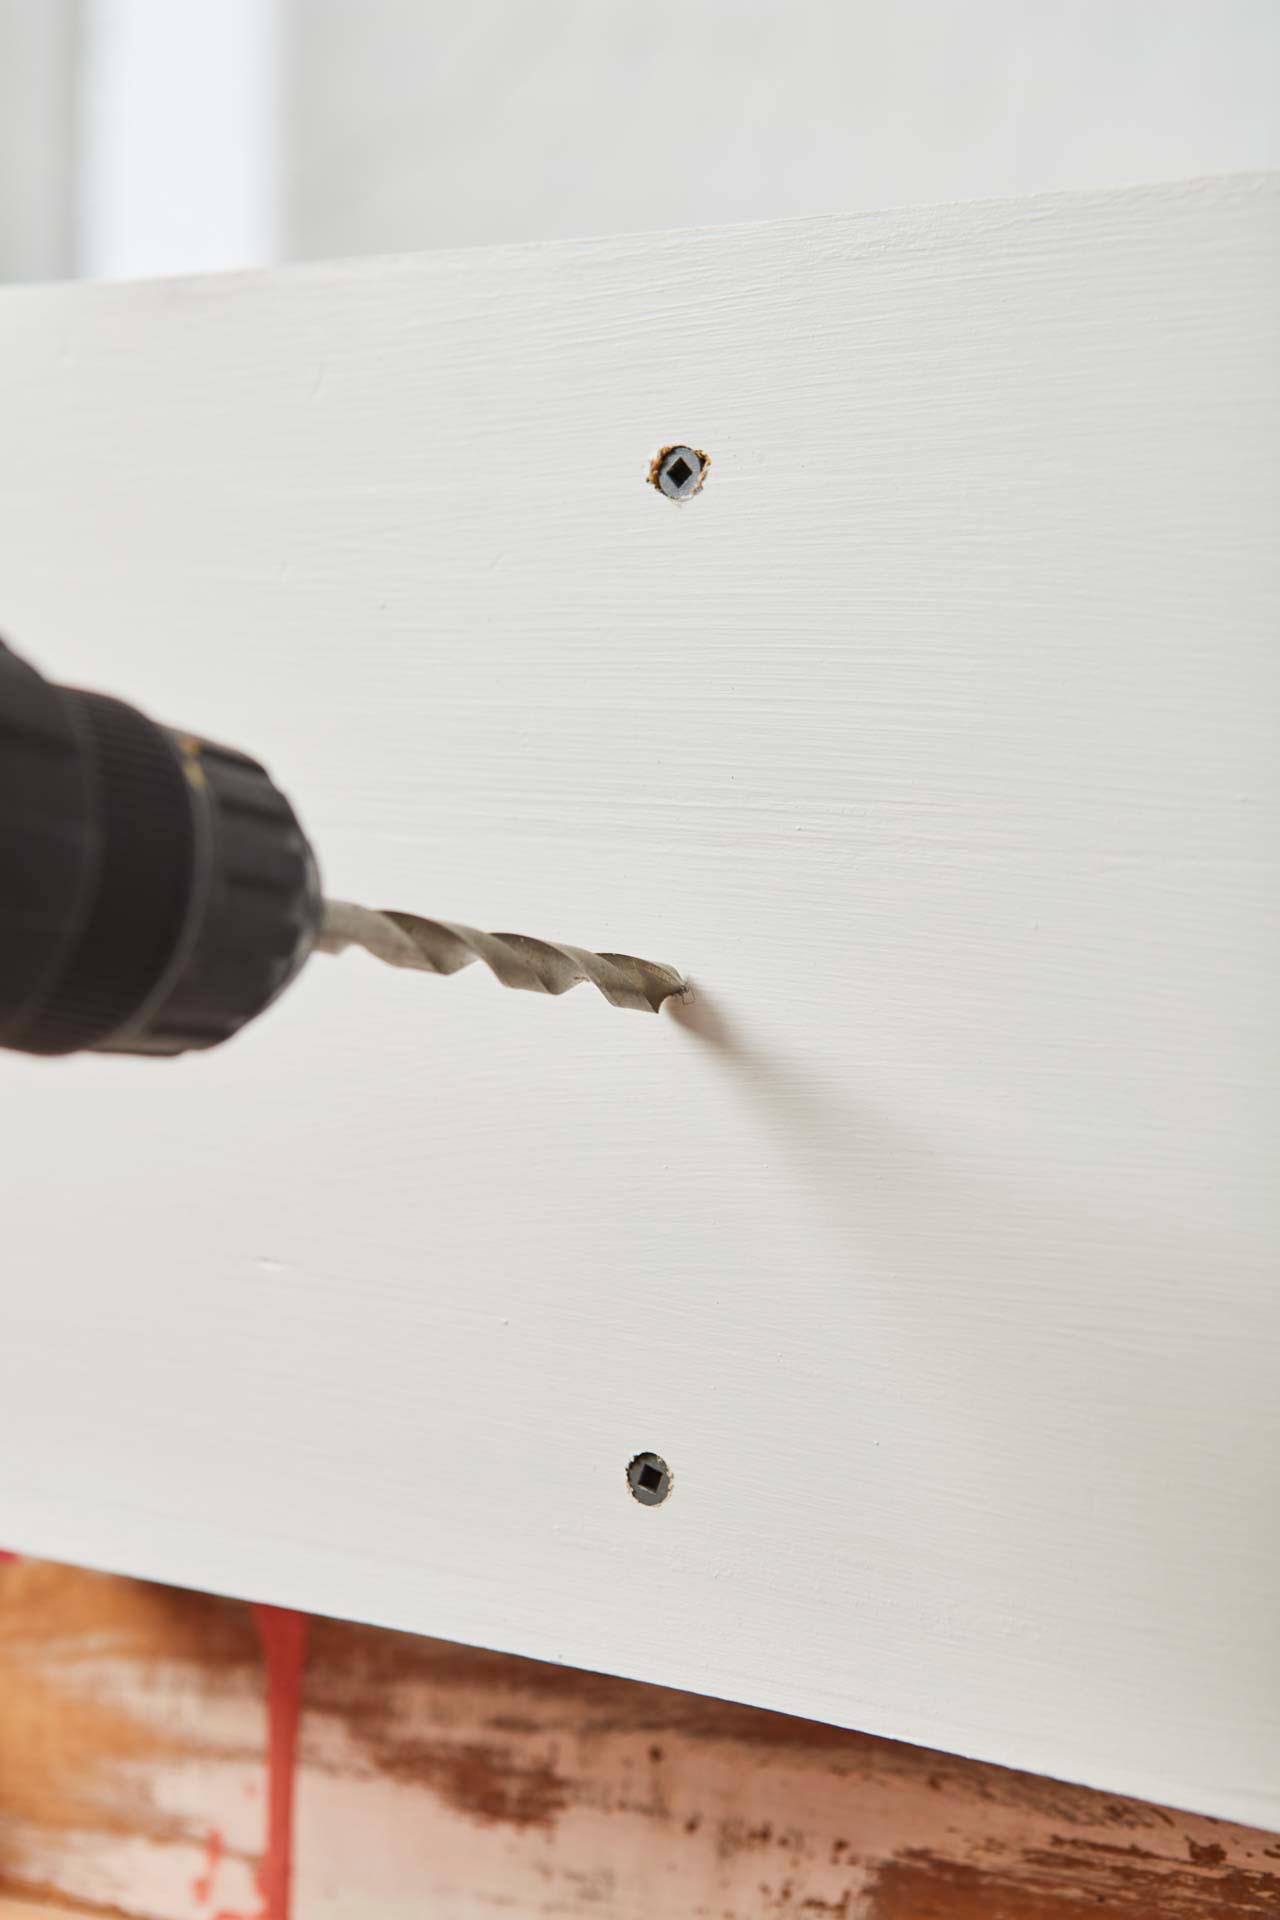 Power drill about to drill a hole between two holes